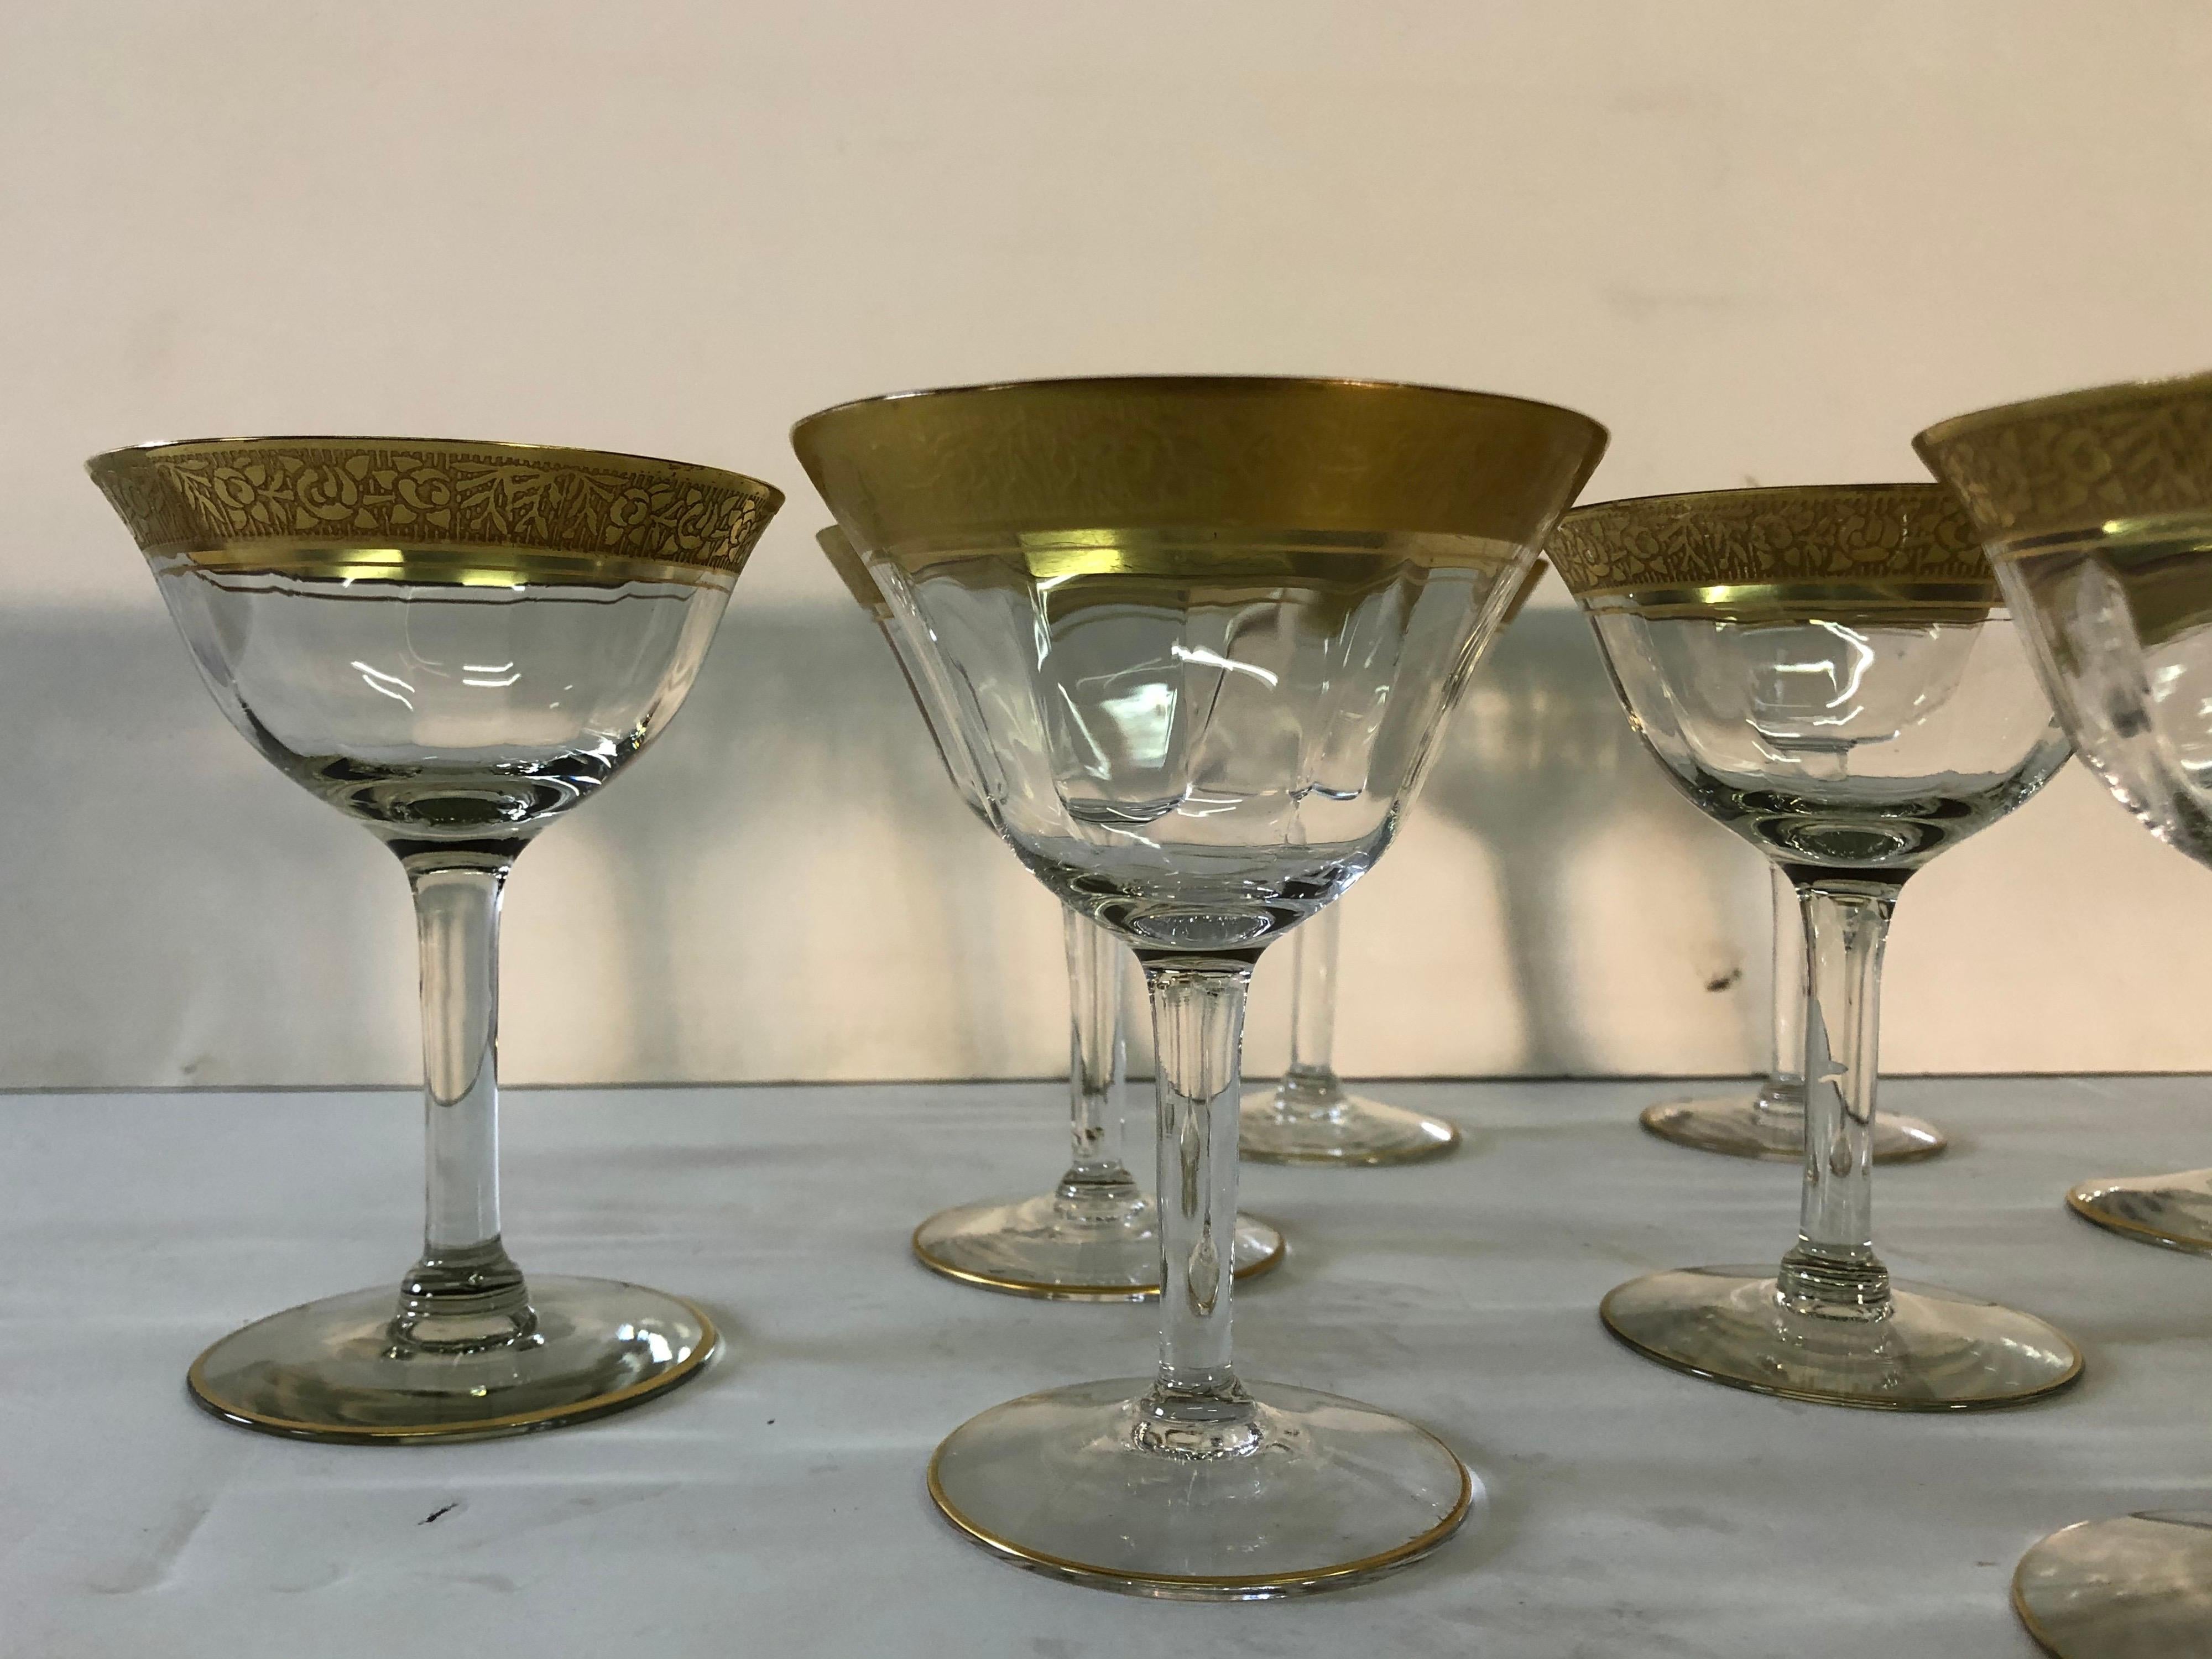 Vintage set of 10 Tiffin Glass Co. Rambling rose gold rim coupes. Light wear from use to the gold. No marks.